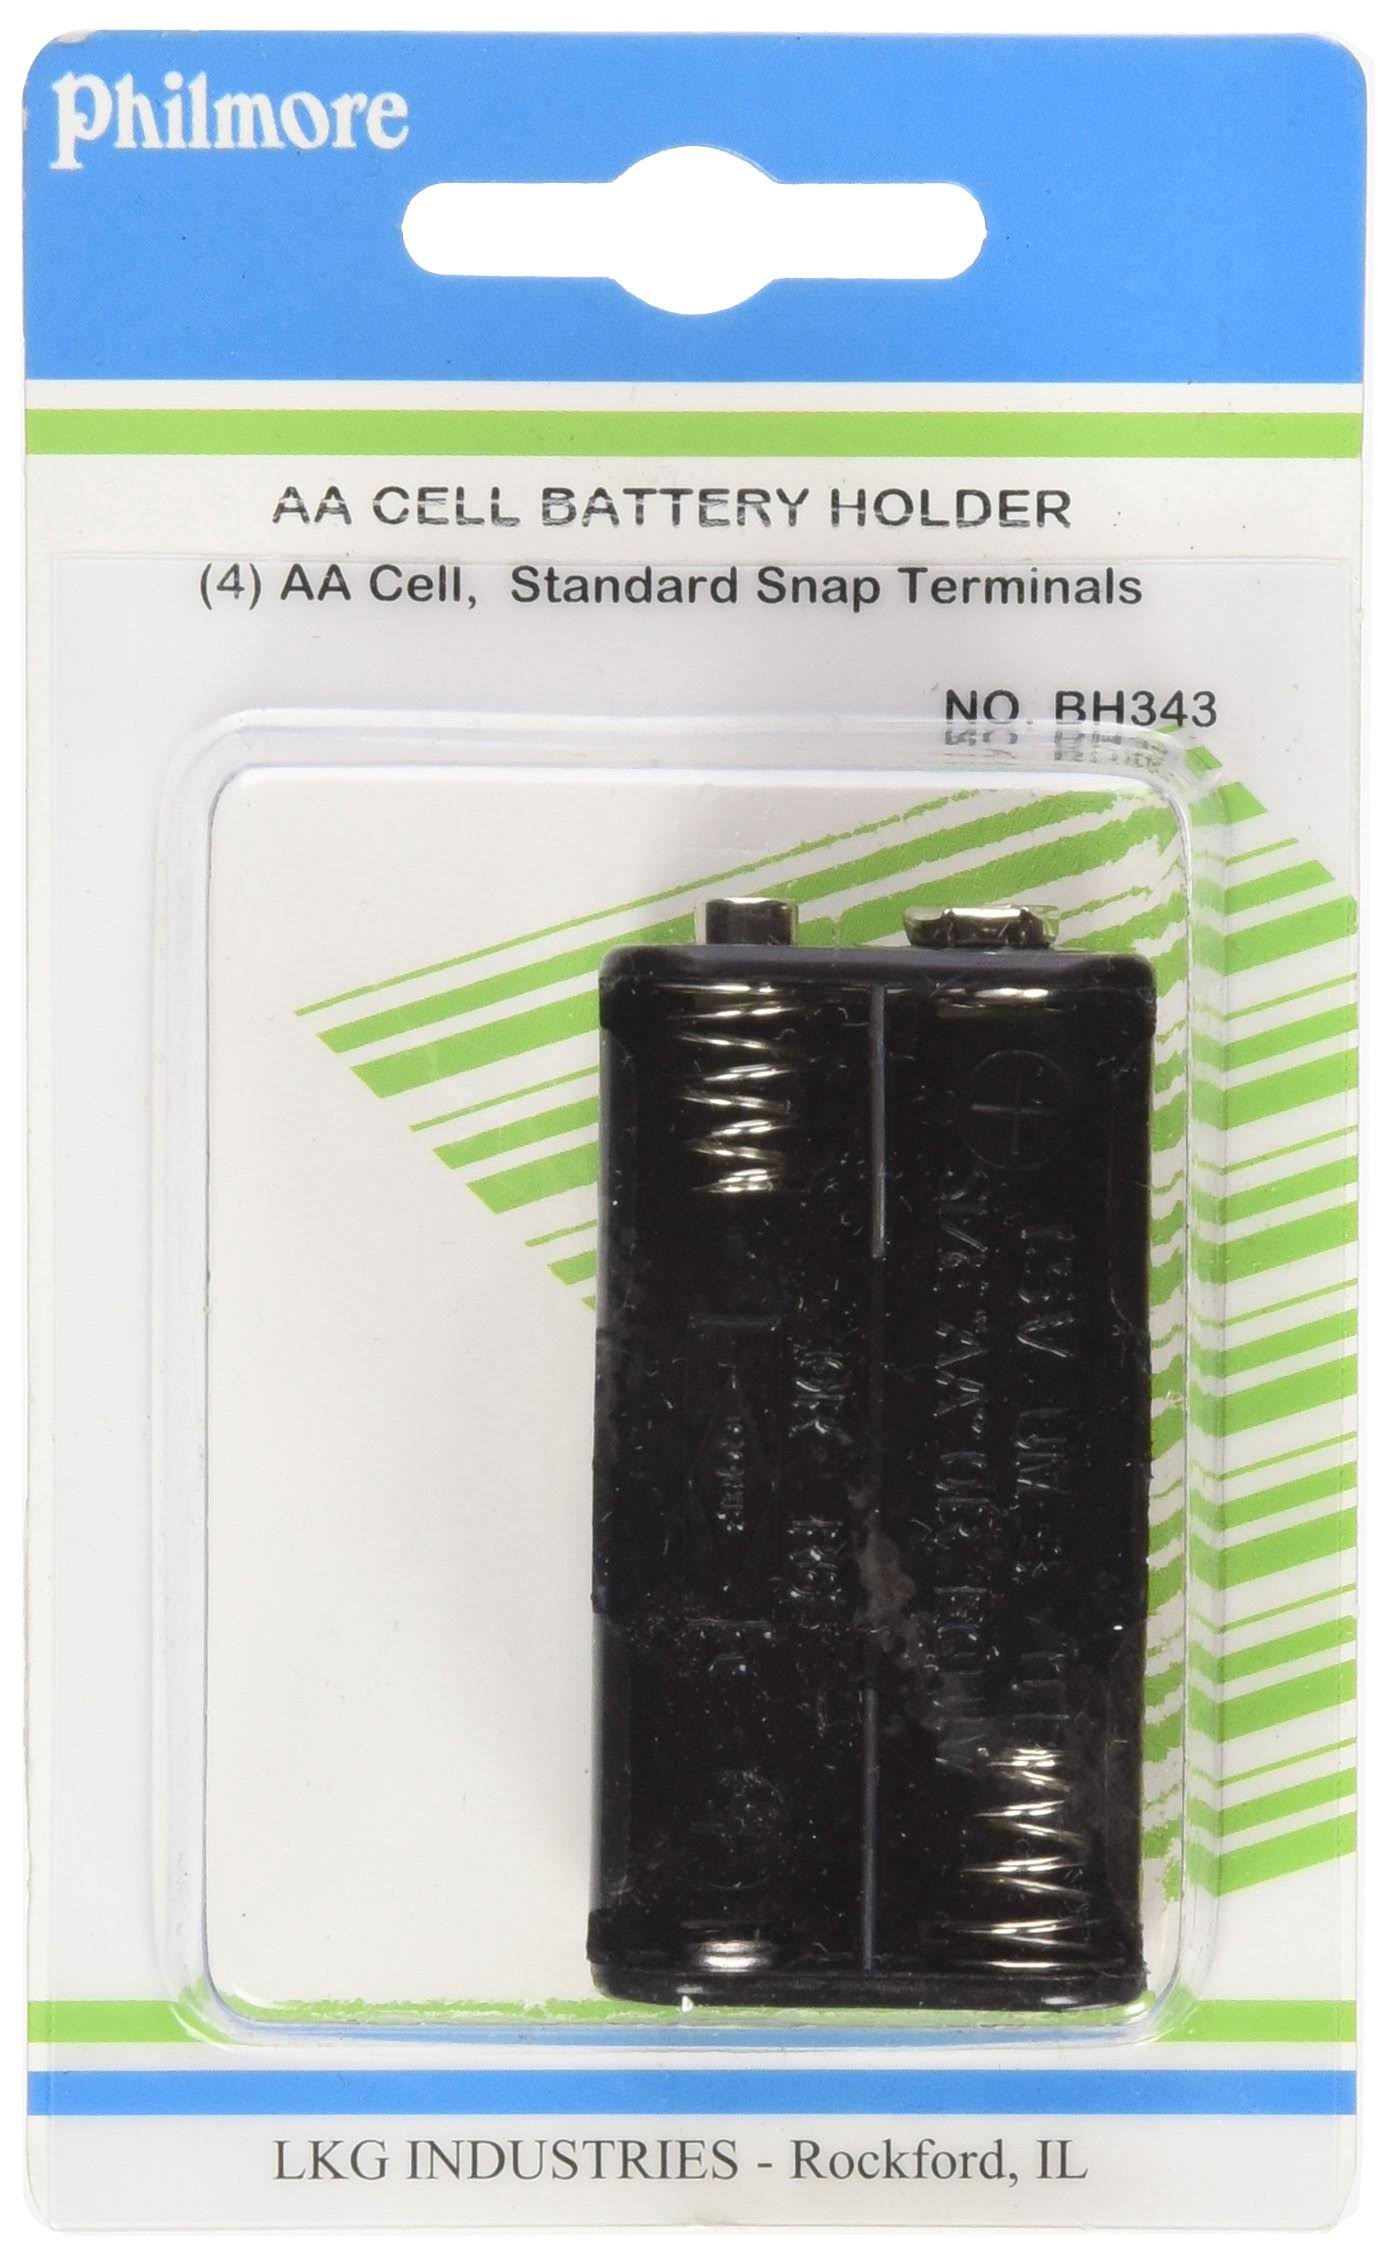 Philmore Battery Holder for 4 "AA" Cells with Snap Connector